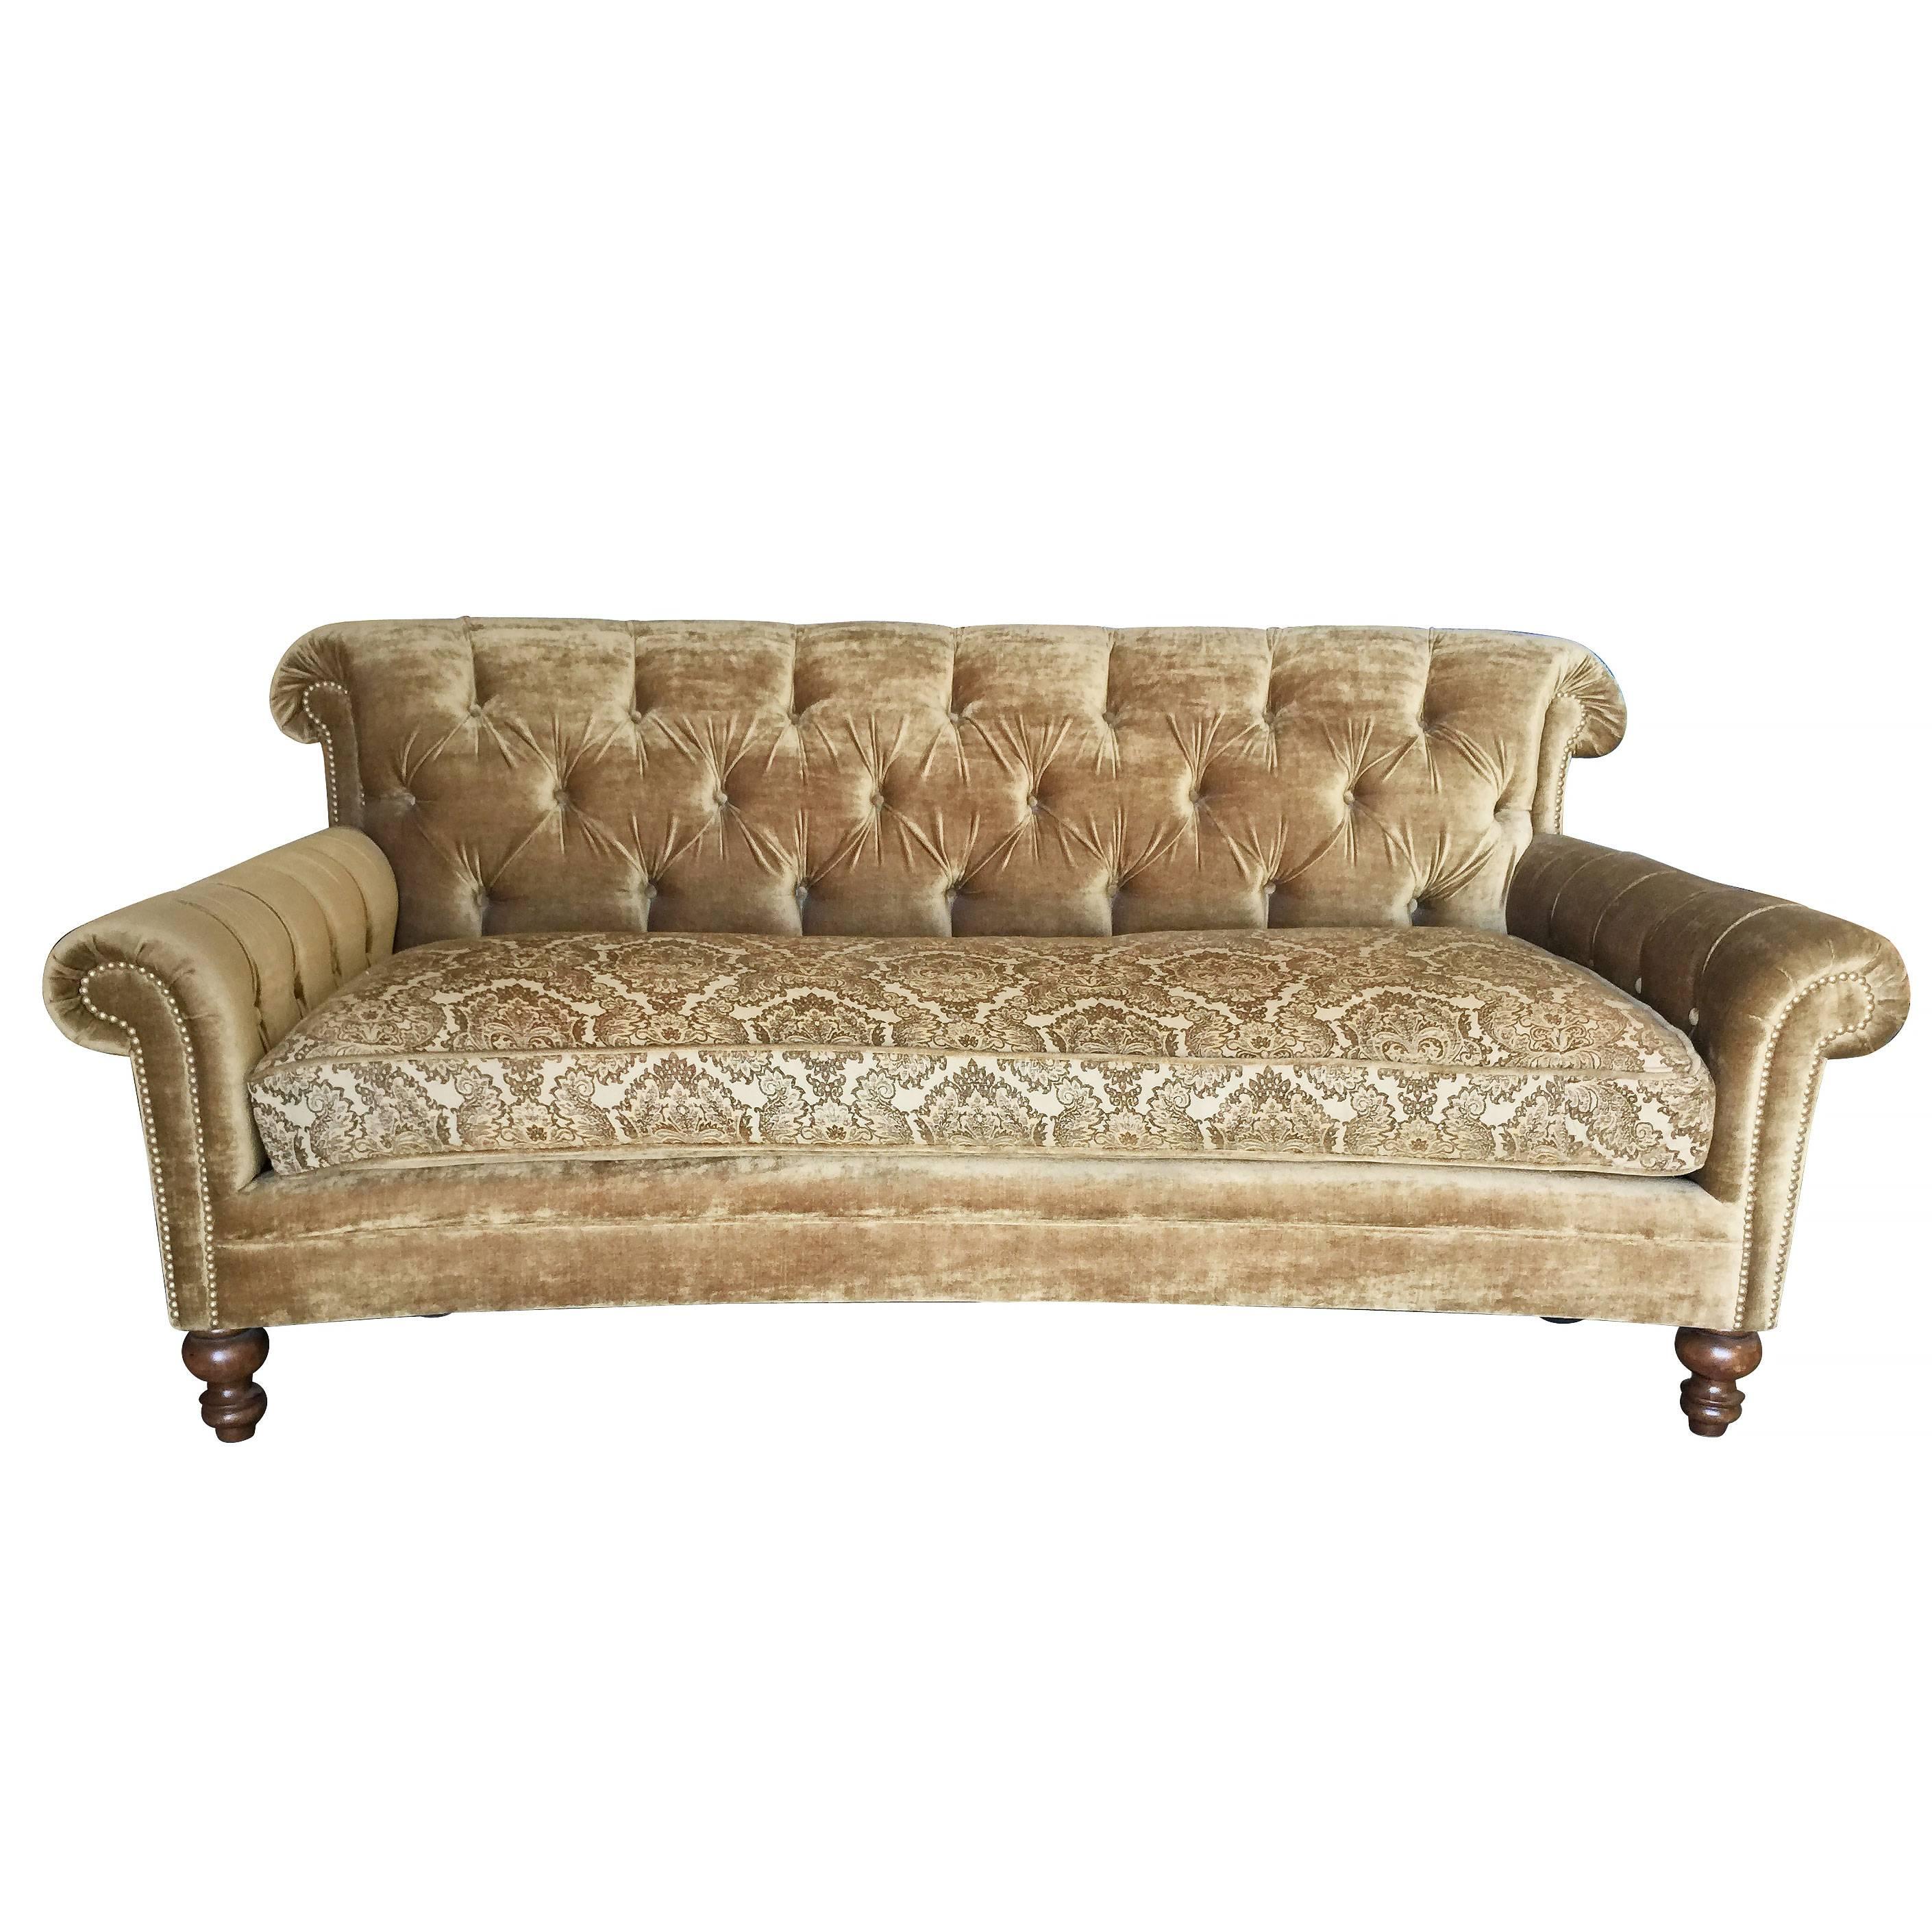 Green Chesterfield style tufted sofa with dark stain legs and scrolling arms.